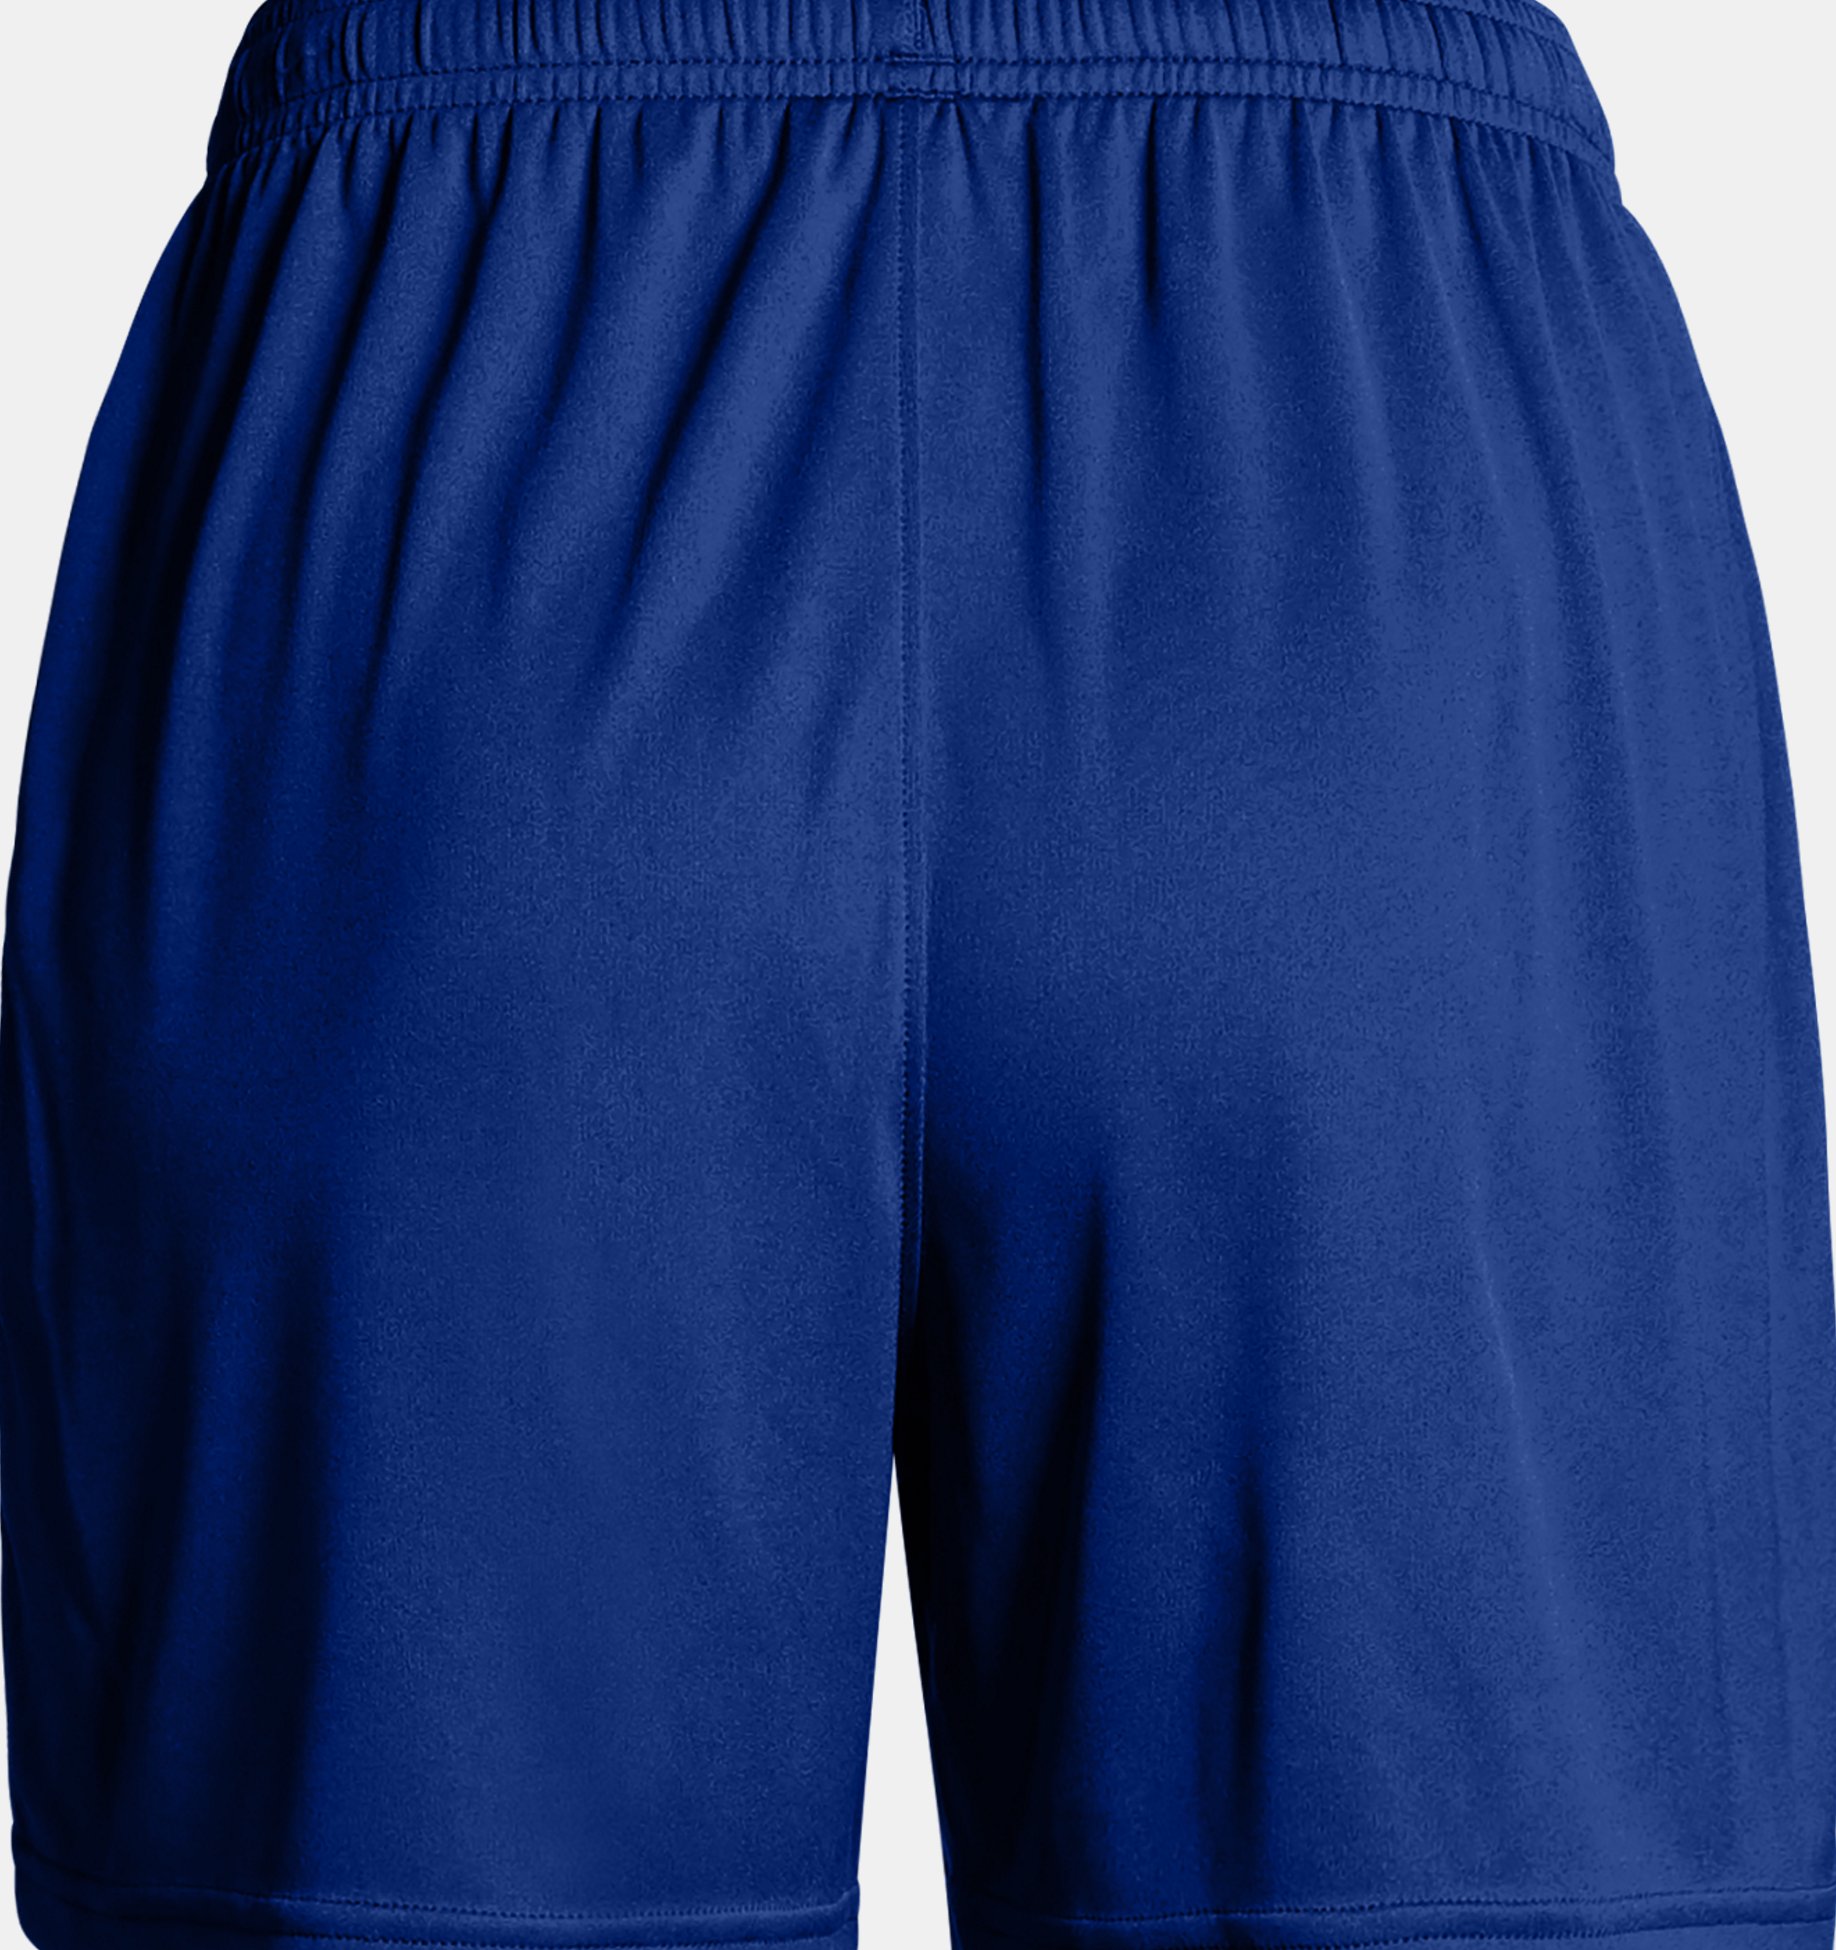 Under Armour Womens Maquina 2.0 Soccer Shorts 